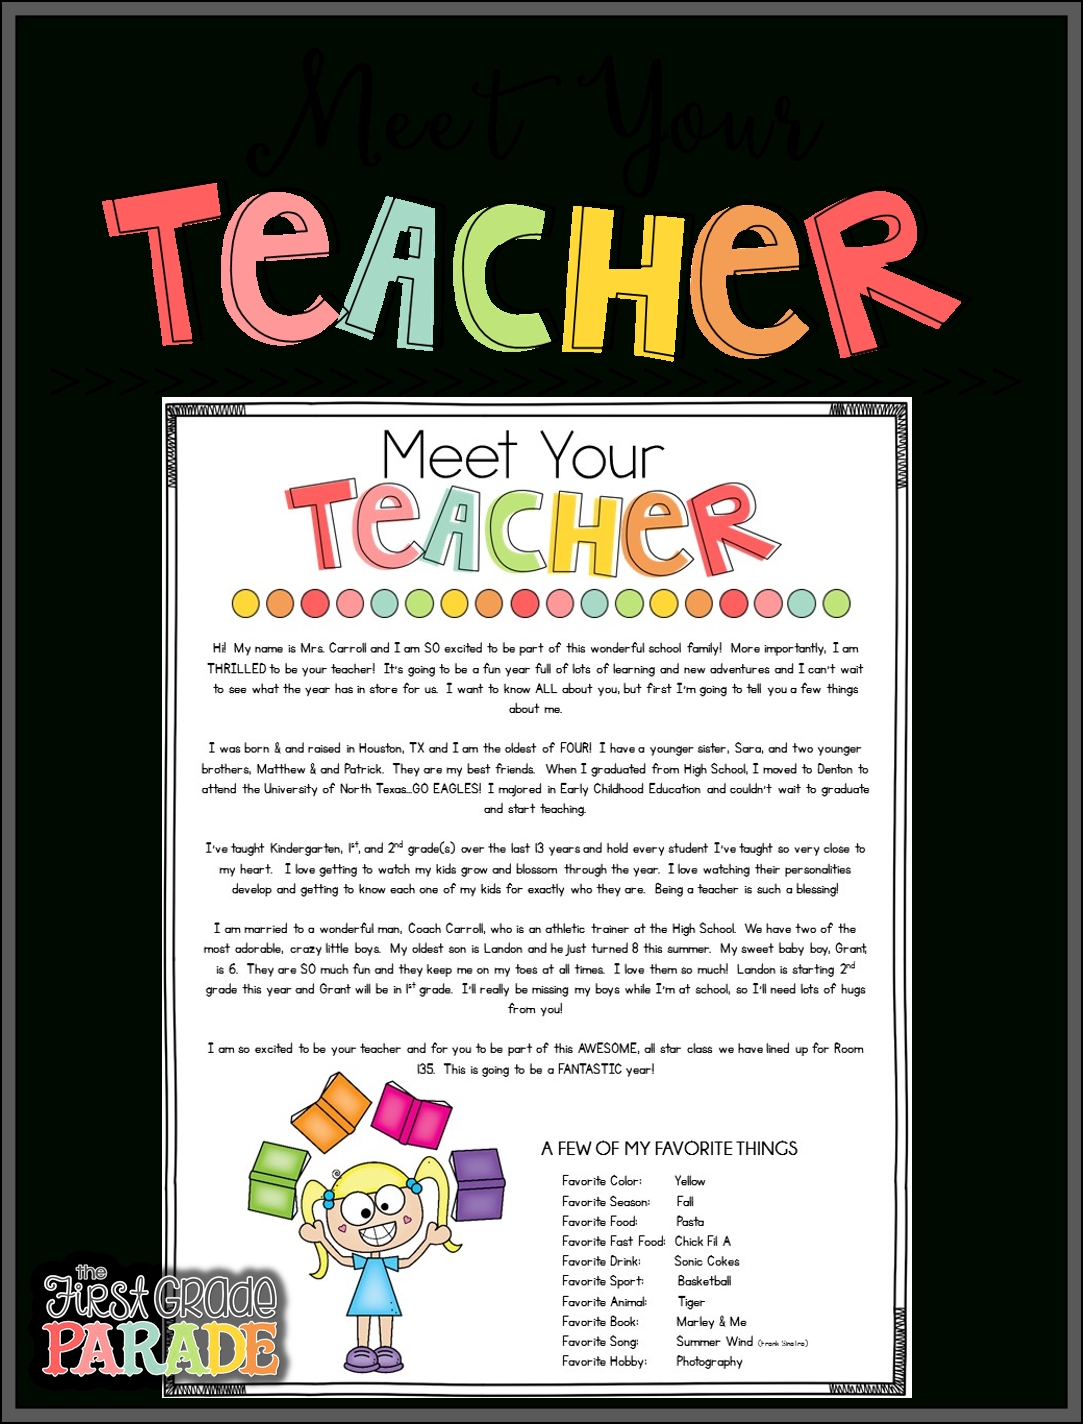 Is My Child Ready For Kindergarten Checklist Template Samples Meet regarding A Few Of My Favorite Things Template